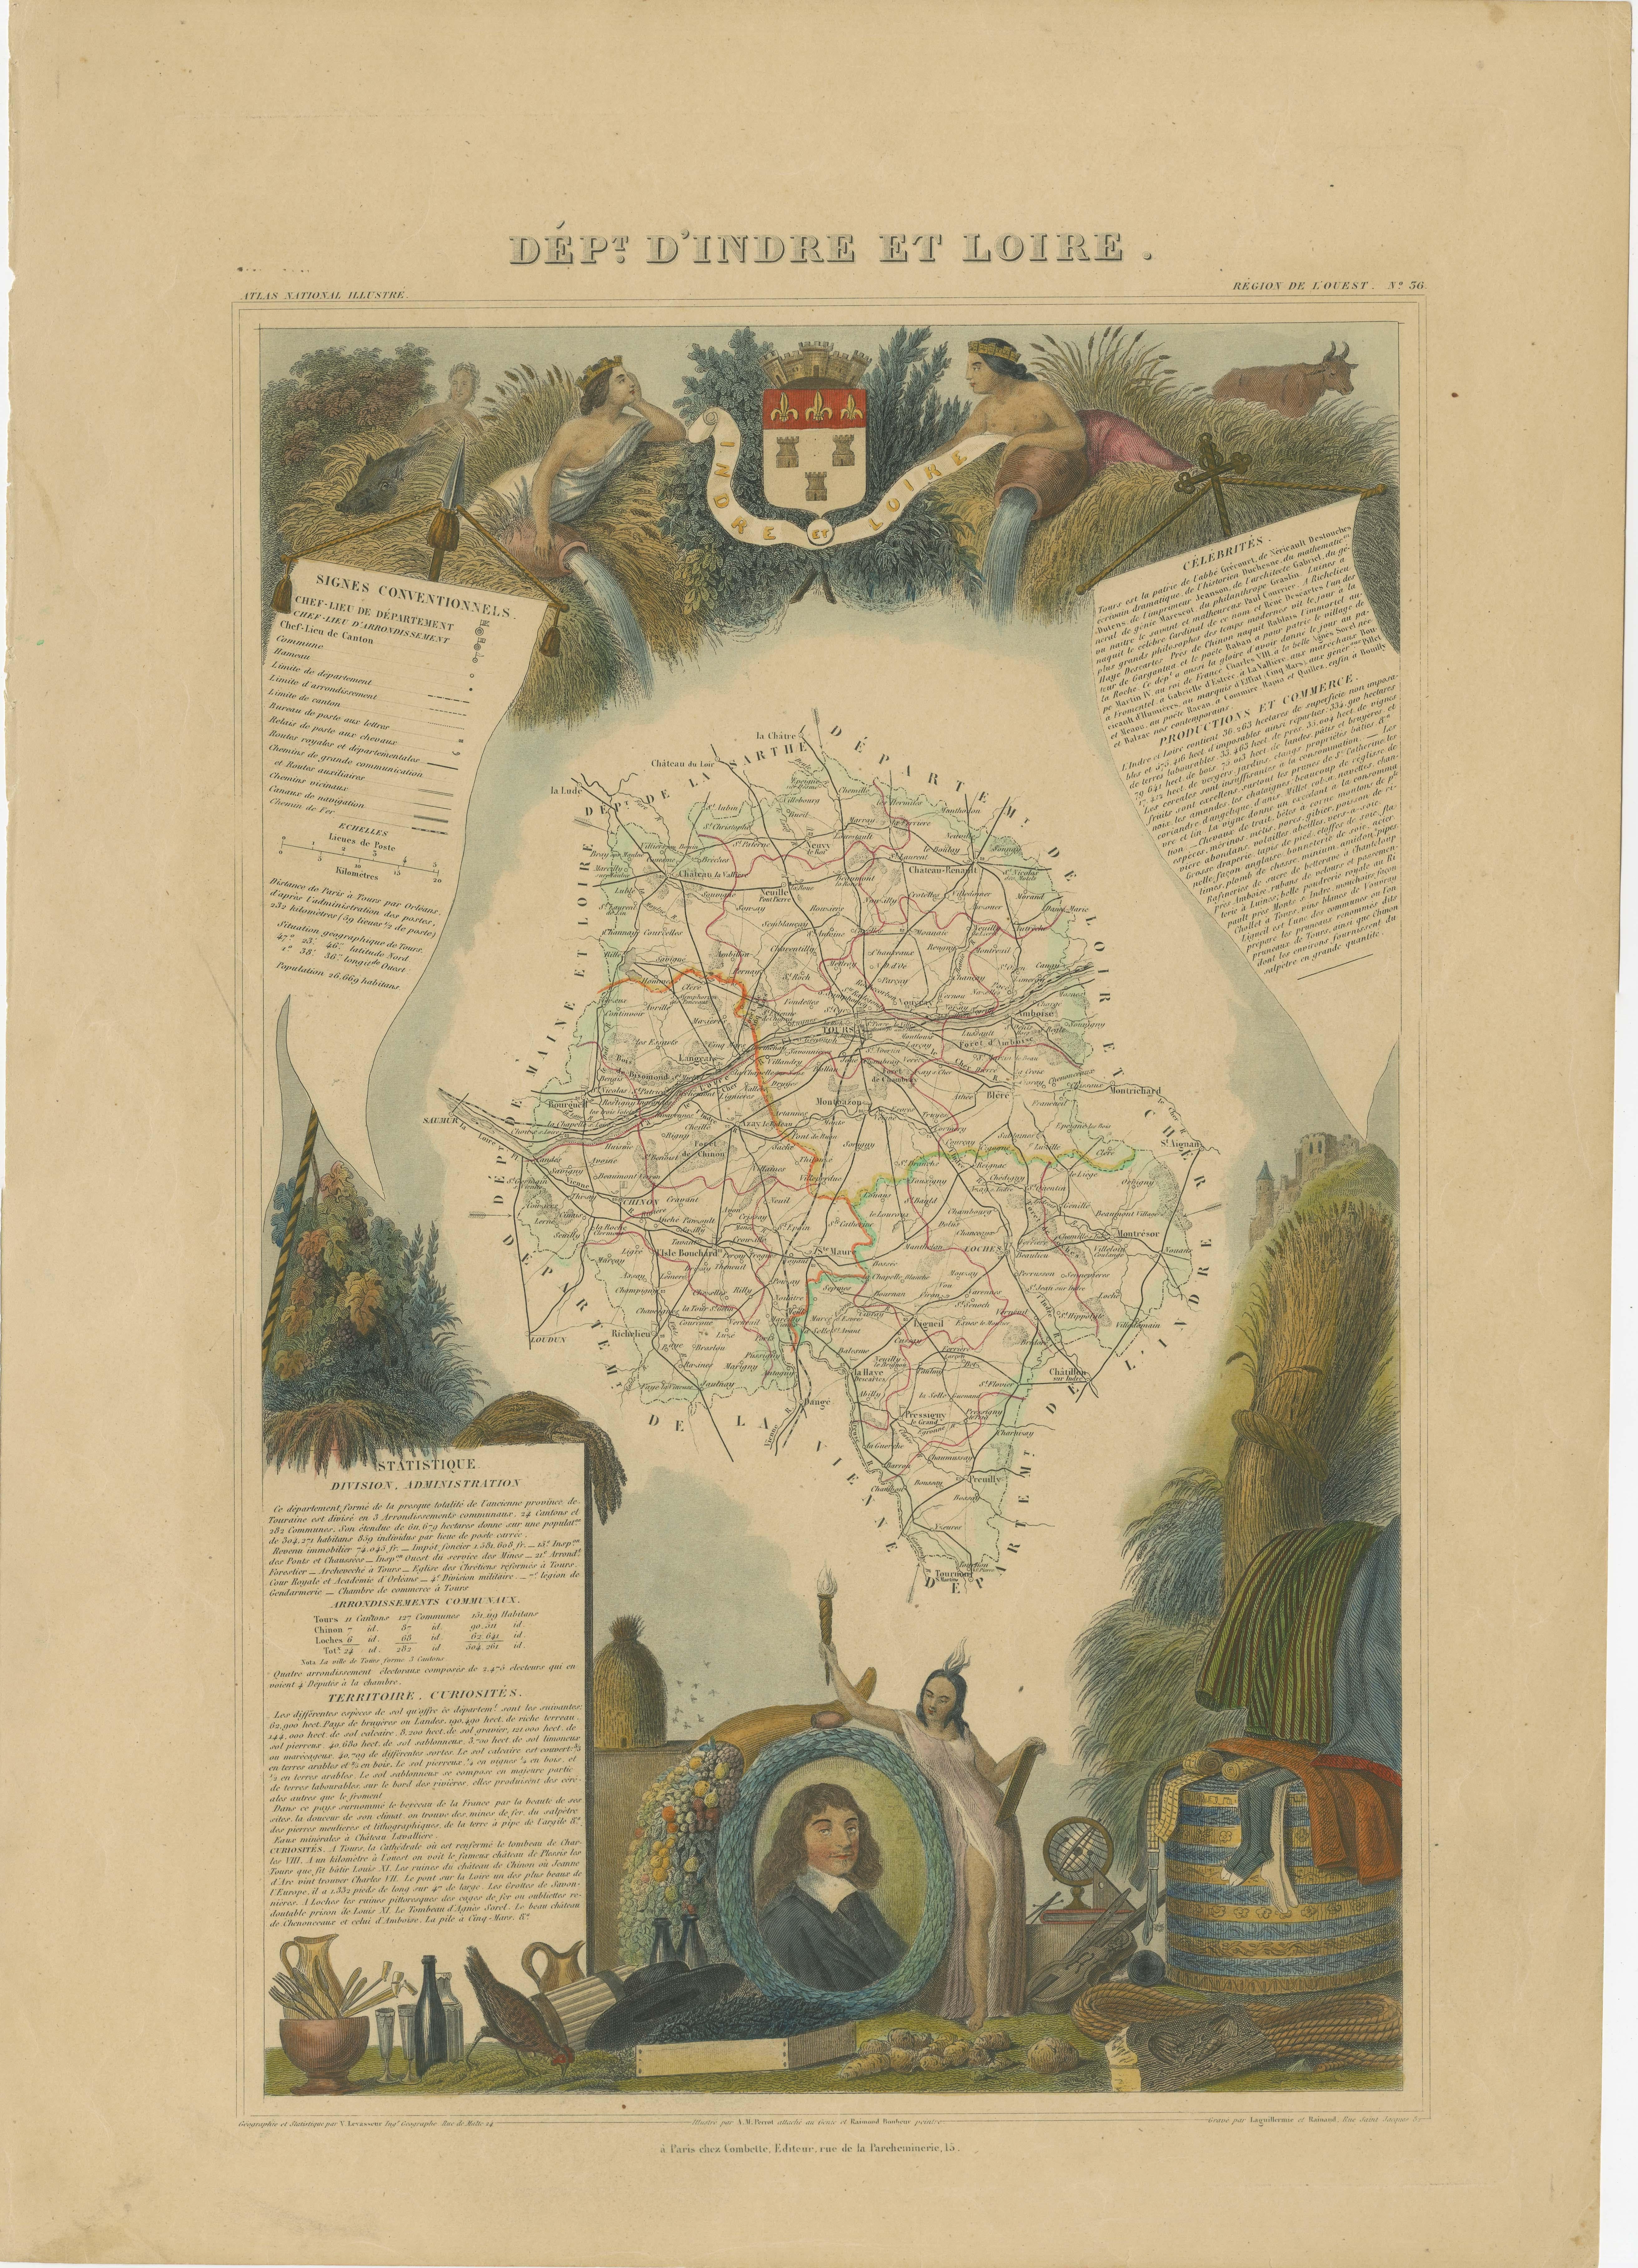 Antique map titled 'Dépt. d'Indre et Loire'. Map of the Department de L’Indre et Loire, France. This region is known for its fine wines, agriculture, distilled spirits, and cheese. The capital city is Tours. The whole is surrounded by elaborate